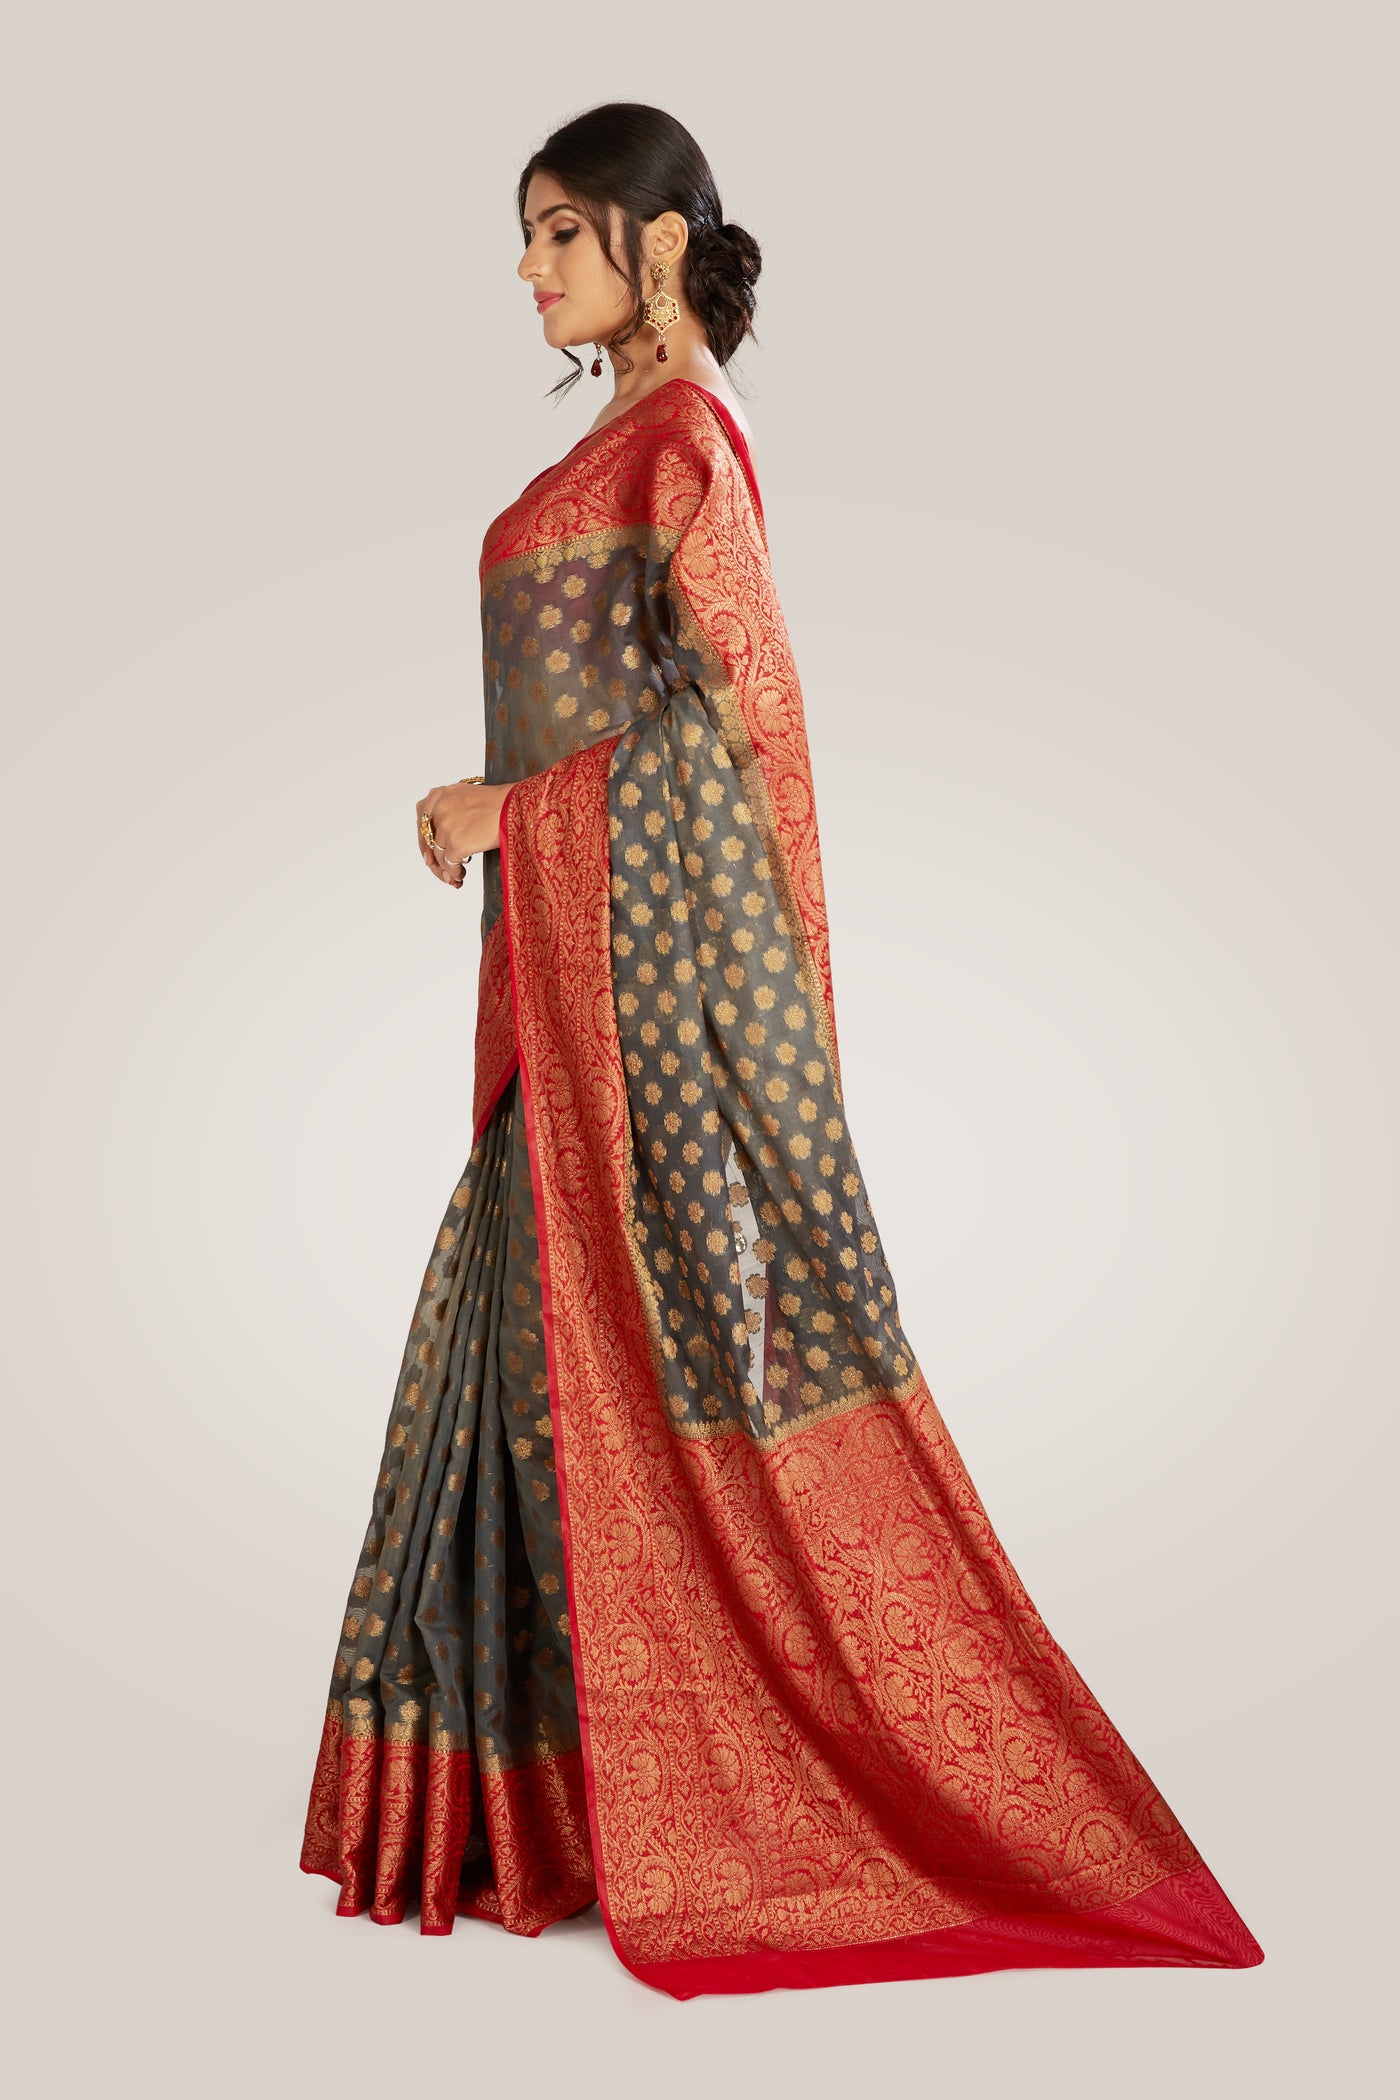 Traditional Tissue Saree Indian Clothing in Denver, CO, Aurora, CO, Boulder, CO, Fort Collins, CO, Colorado Springs, CO, Parker, CO, Highlands Ranch, CO, Cherry Creek, CO, Centennial, CO, and Longmont, CO. NATIONWIDE SHIPPING USA- India Fashion X